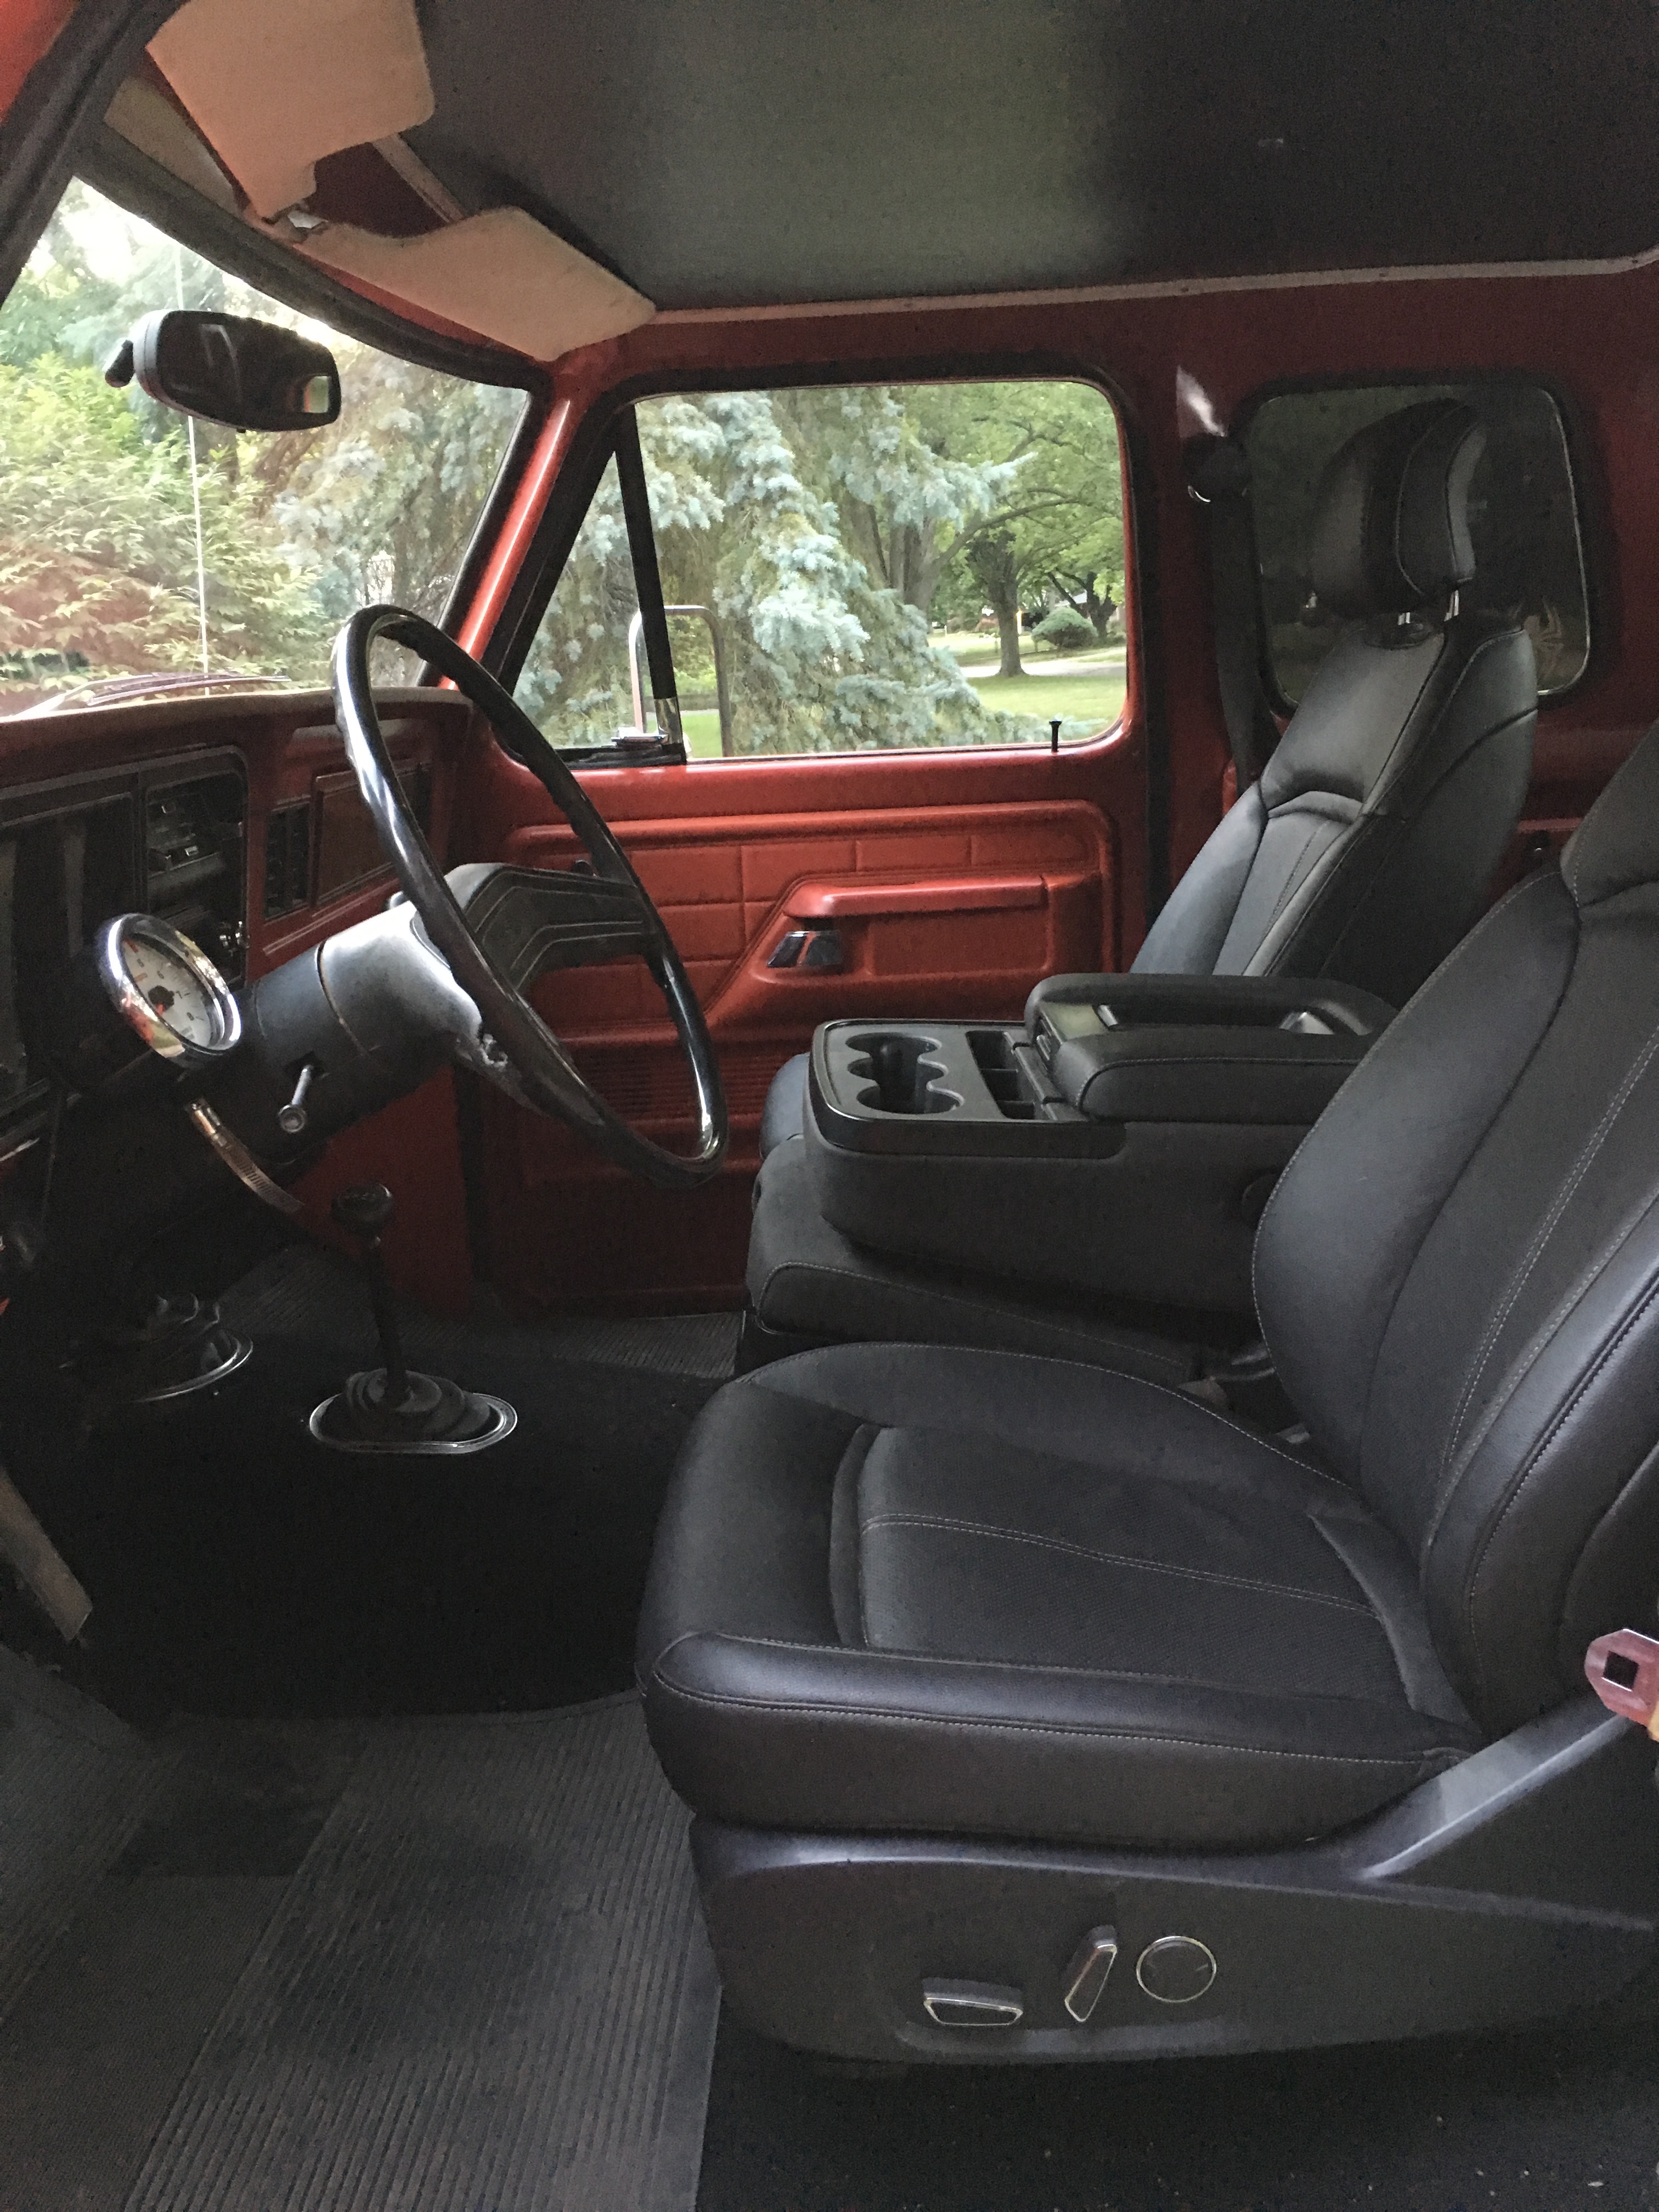 1978 Supercab Interior Upgrades Ford Truck Enthusiasts Forums